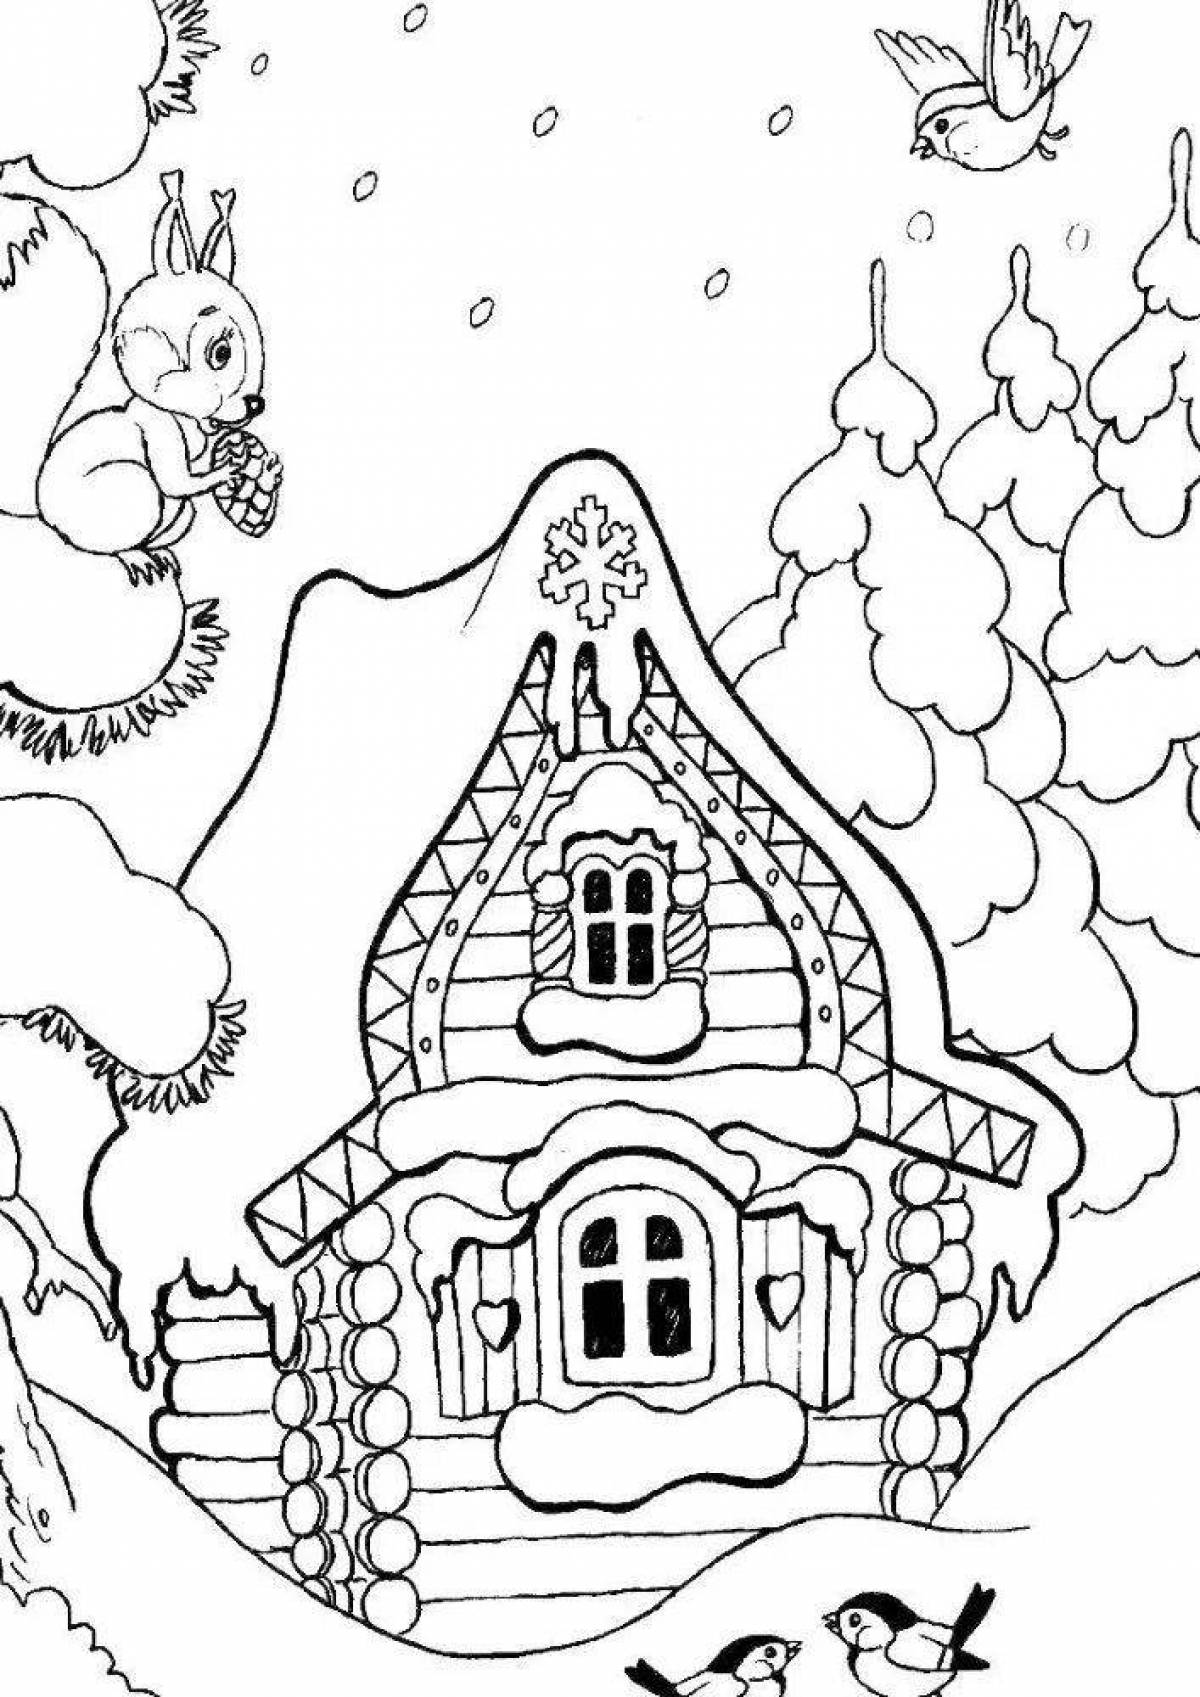 Idyllic coloring house in the woods